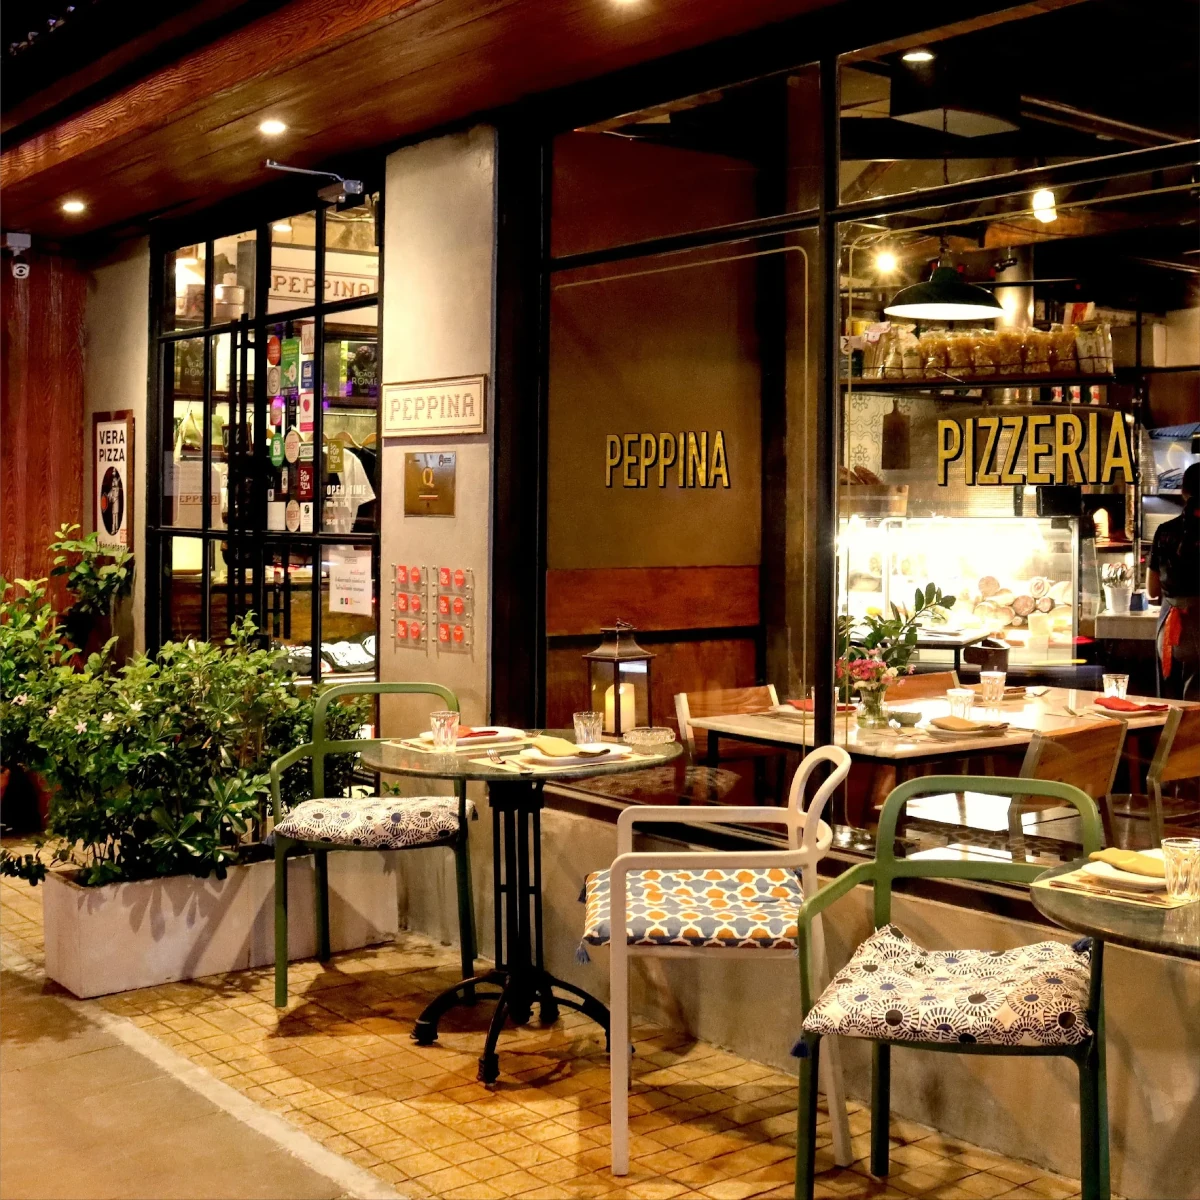 Welcome to Peppina Pizzeria, where the inviting ambiance meets authentic Italian flavors in the heart of Bangkok.